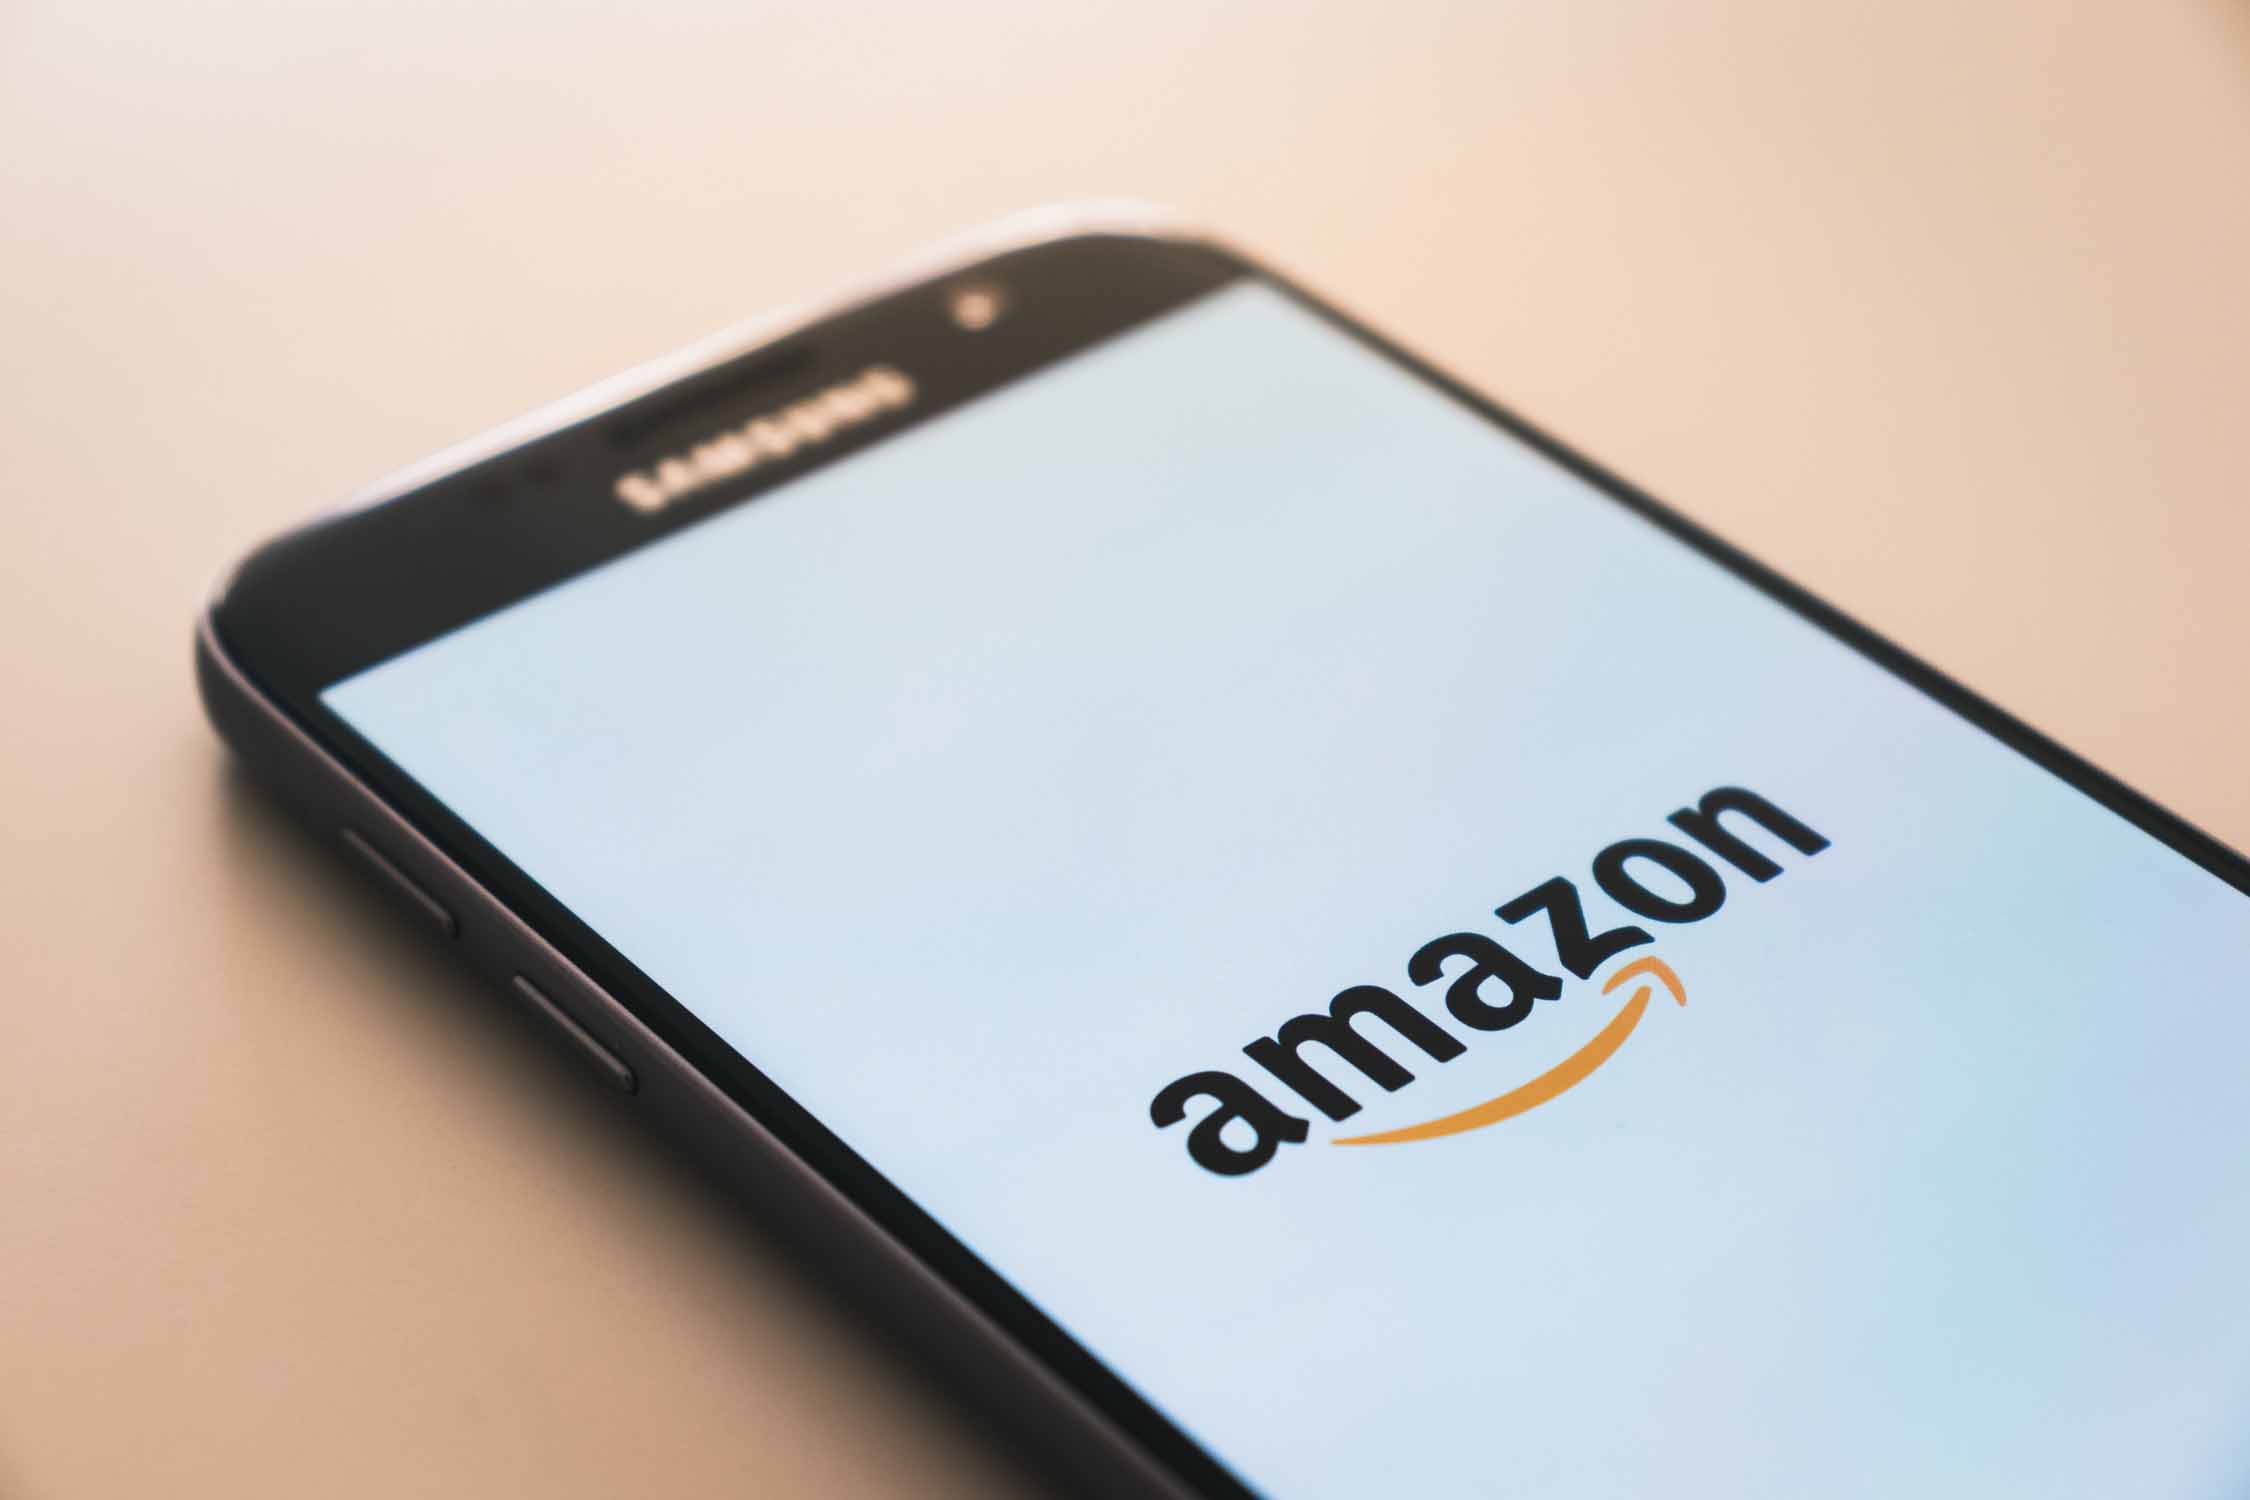 How to compete online against Amazon